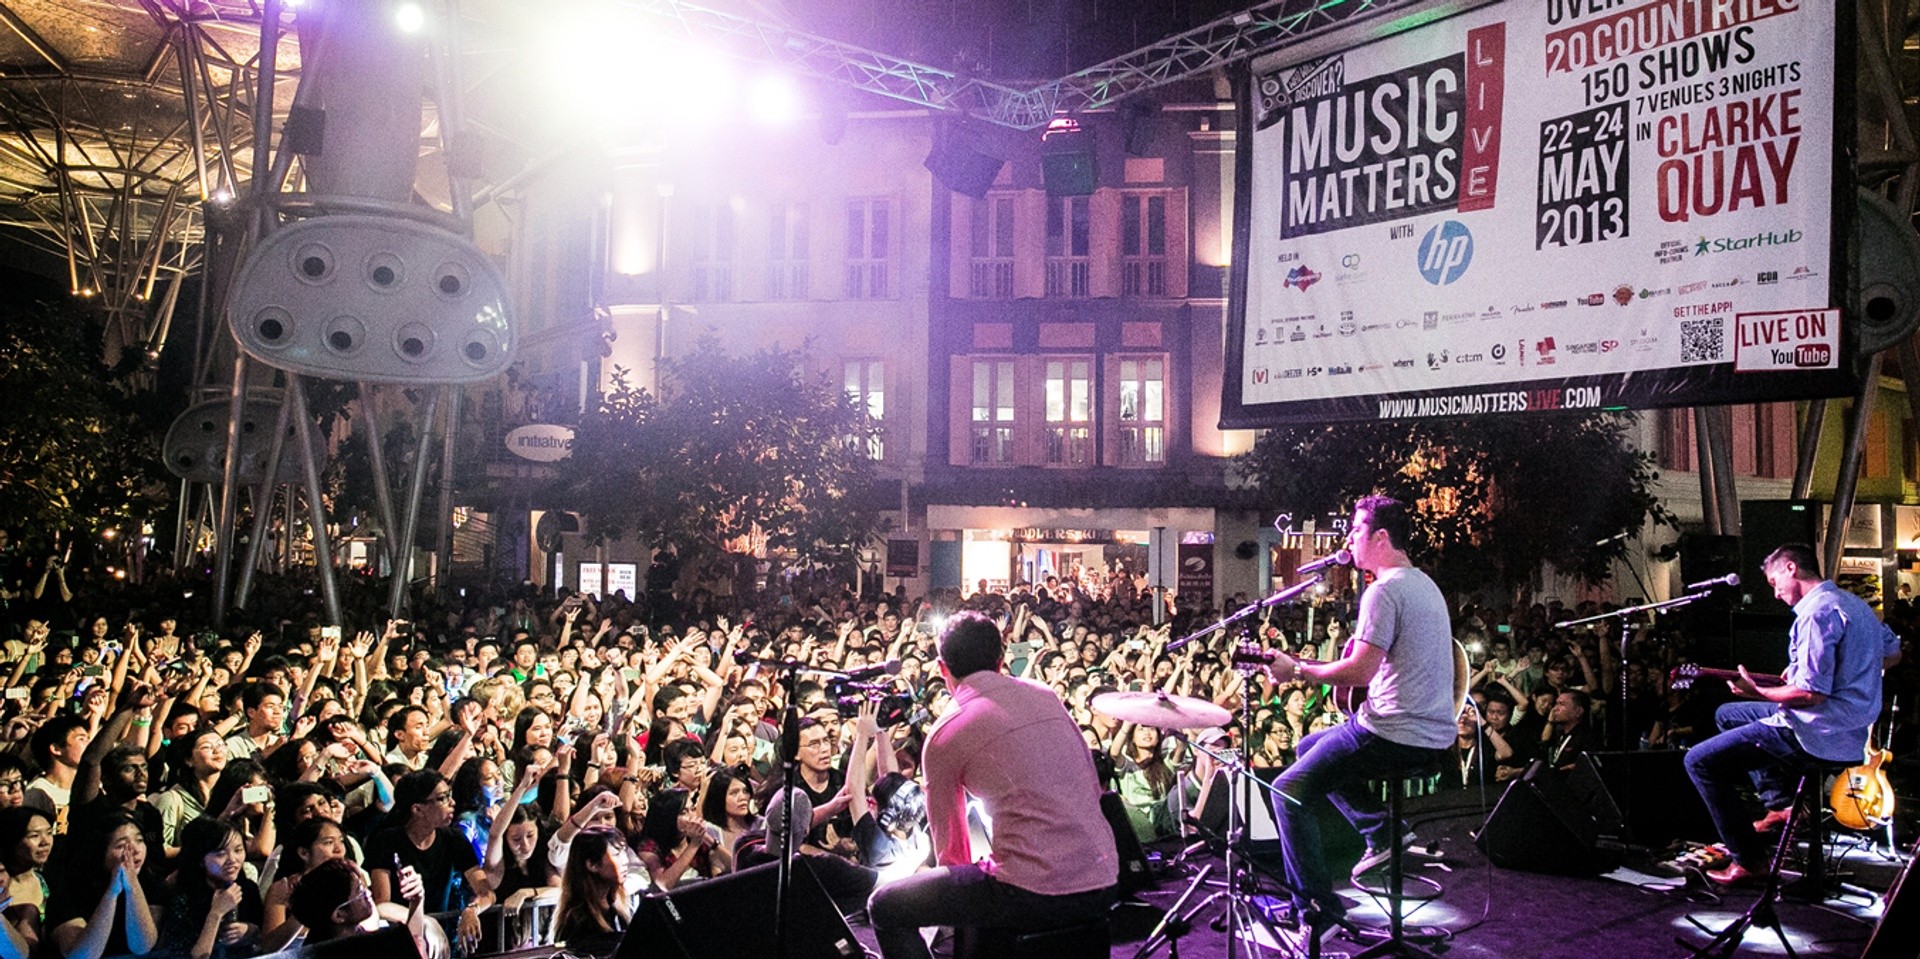 Music Matters Live is calling out for bands this year